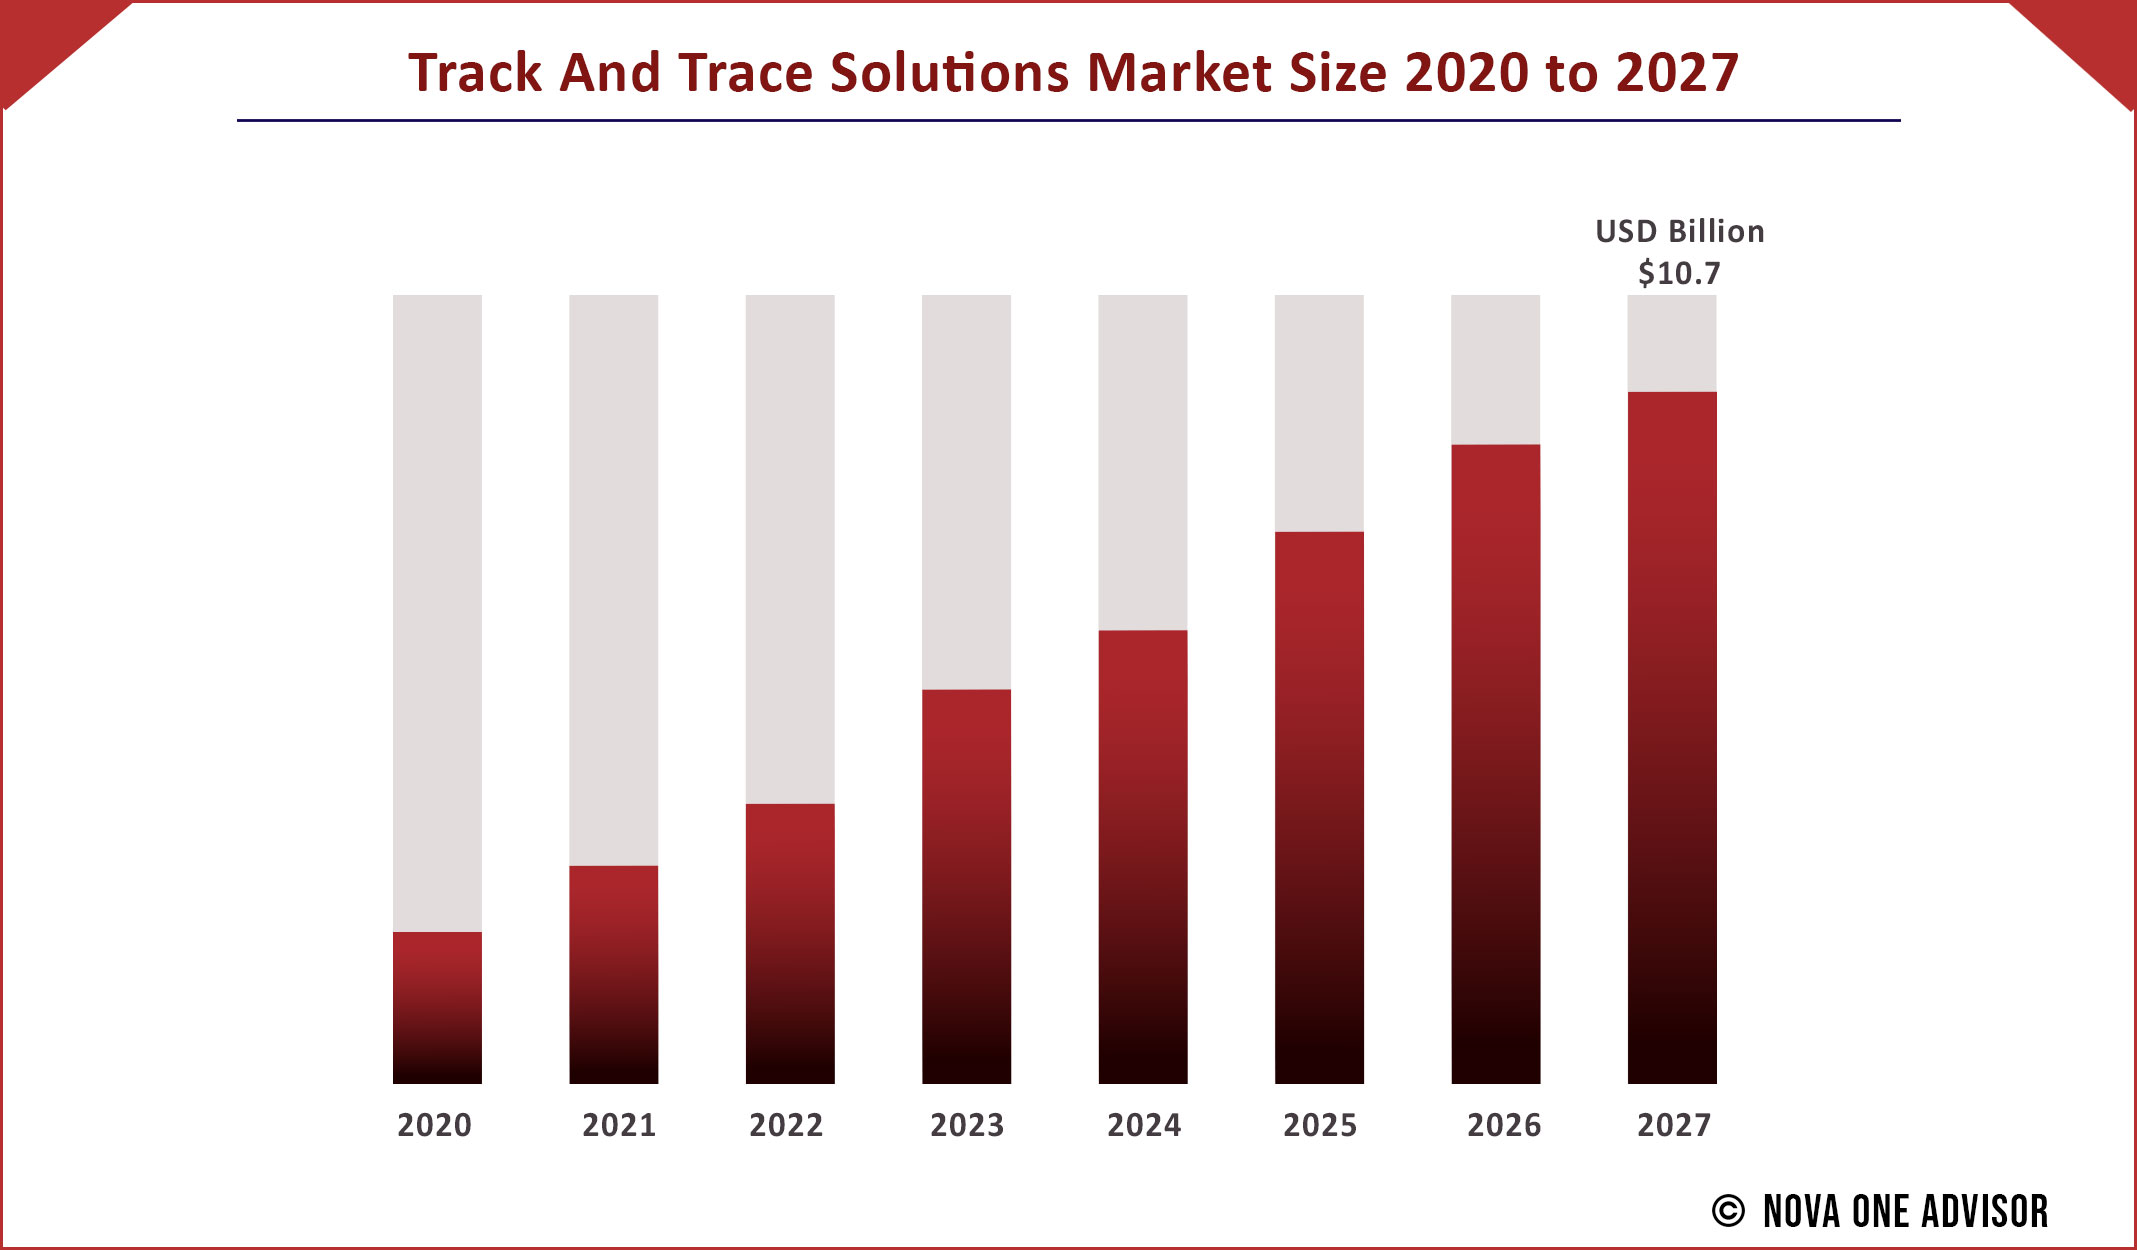 Track And Trace Solutions Market Size 2020 to 2027